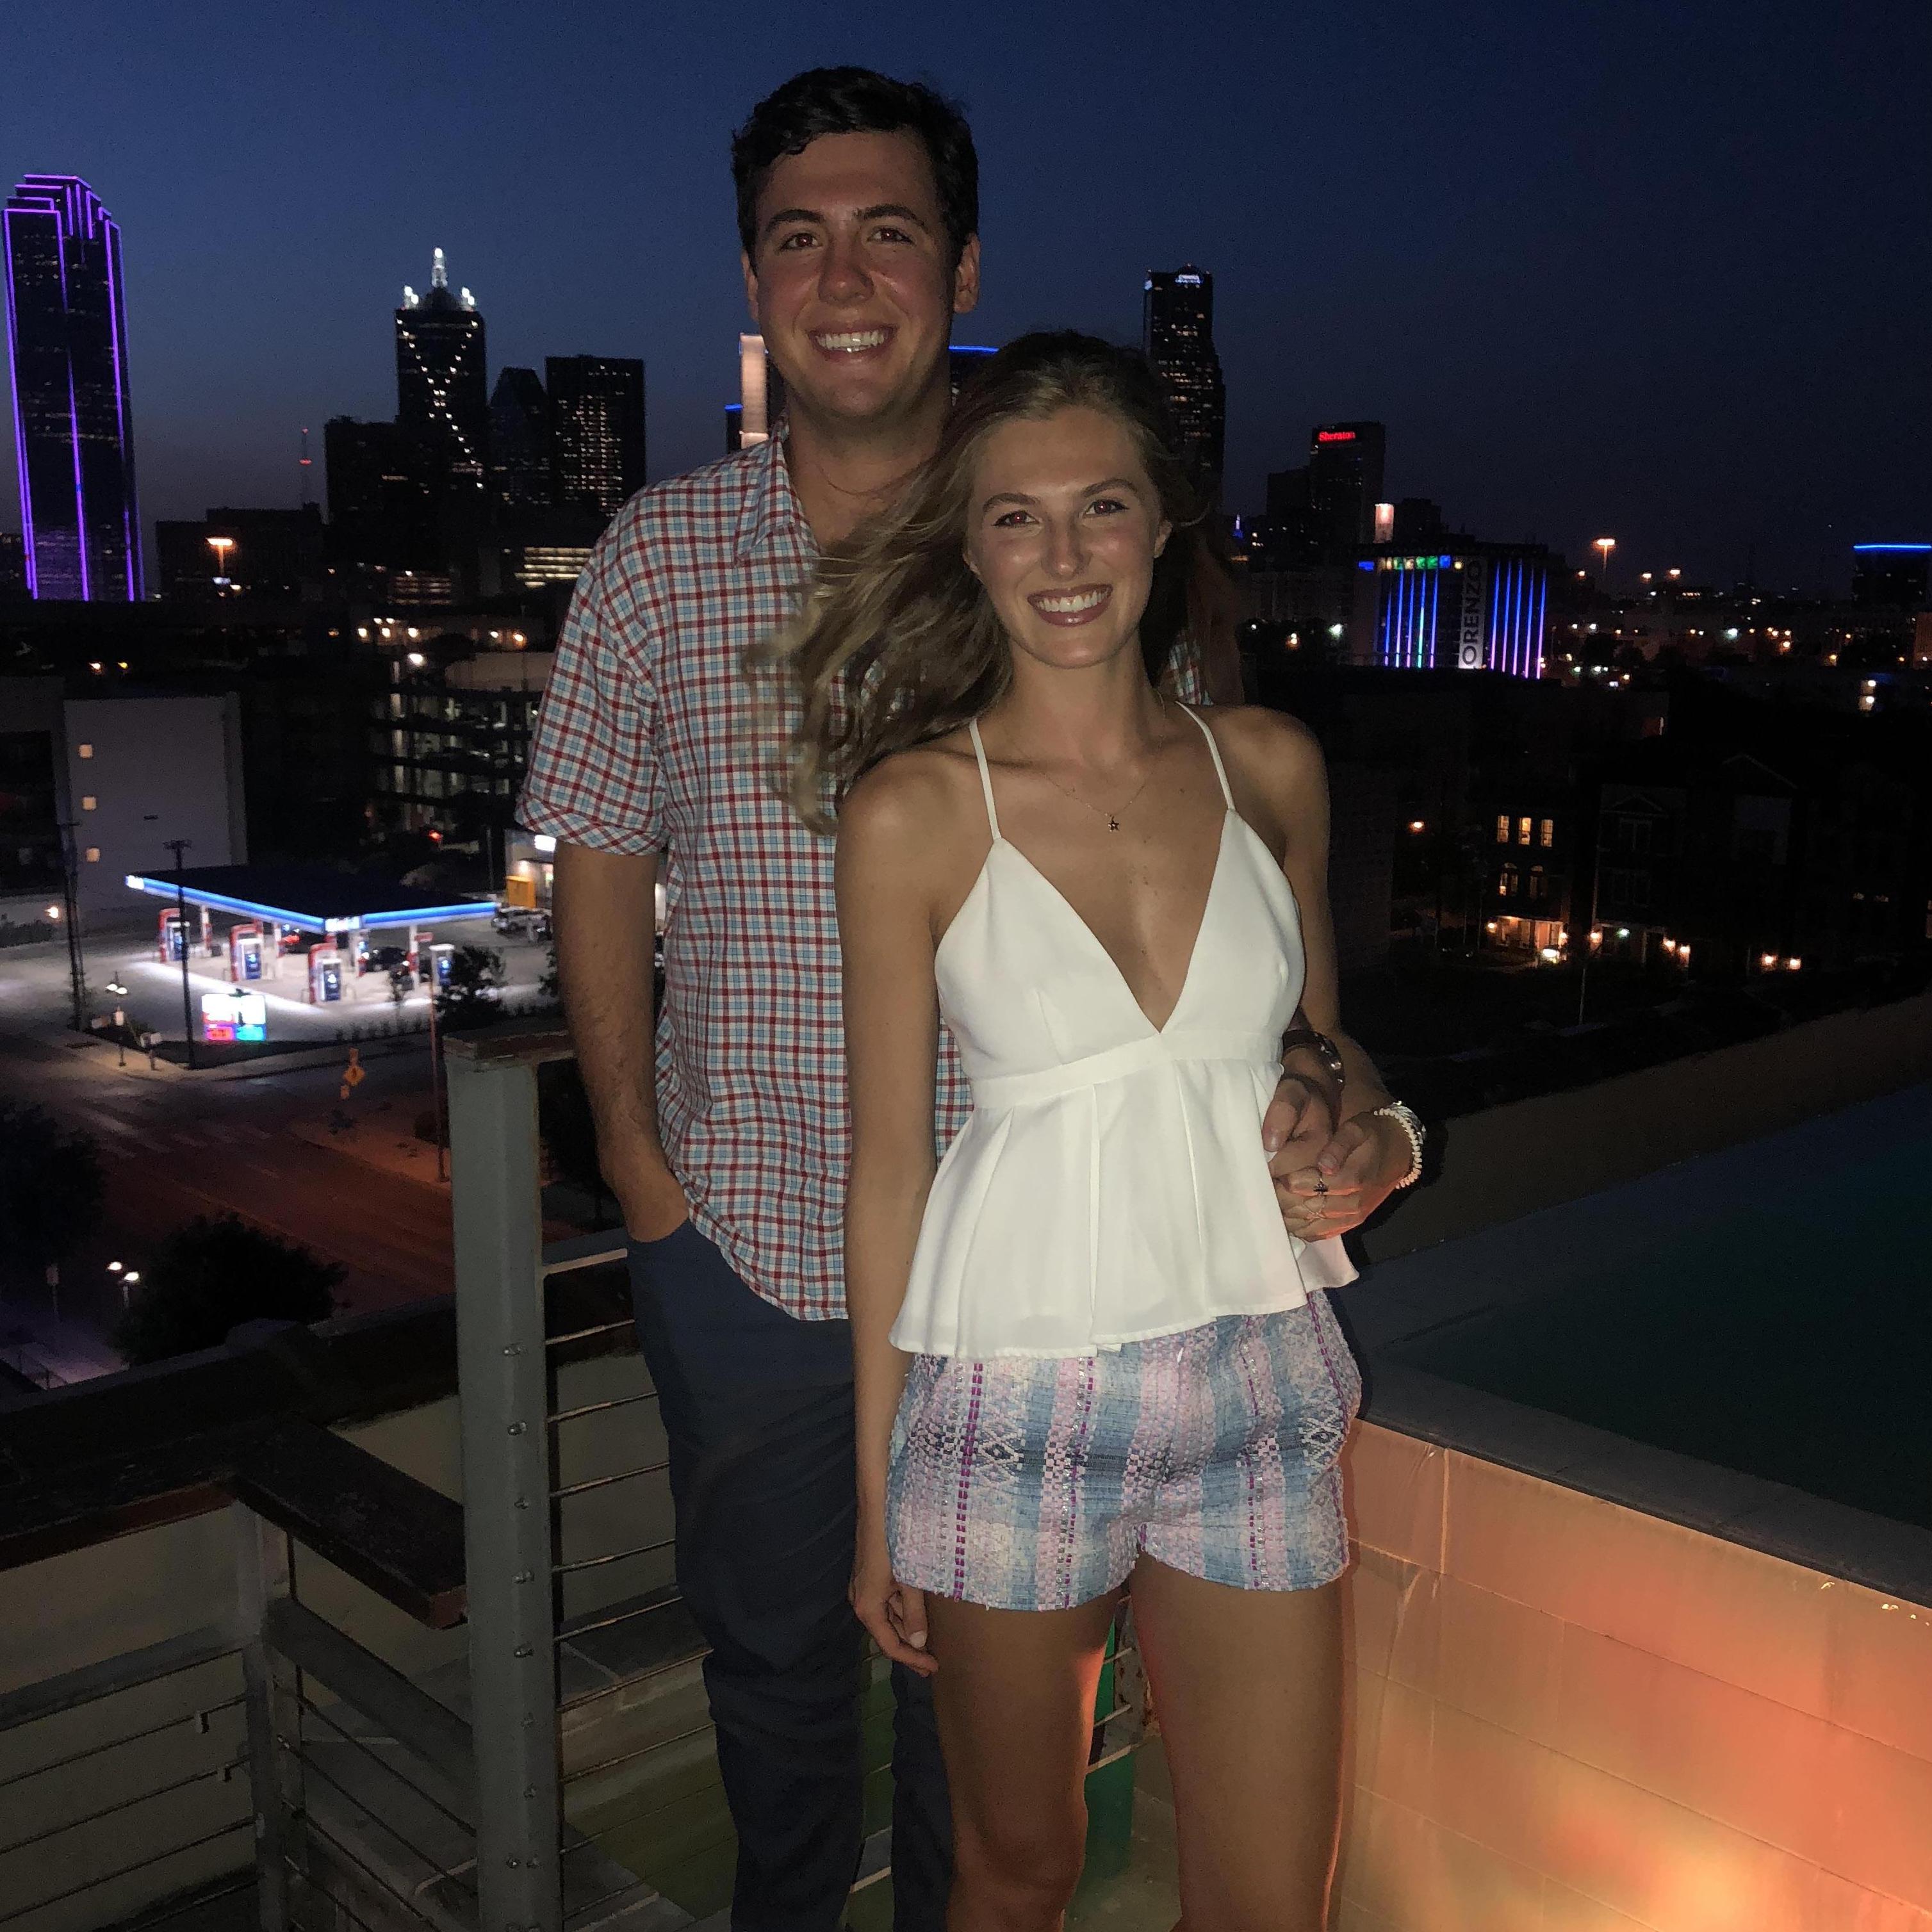 Visiting Dallas before I moved. Carter took us to the spot with the best view of the Dallas skyline for sunset!